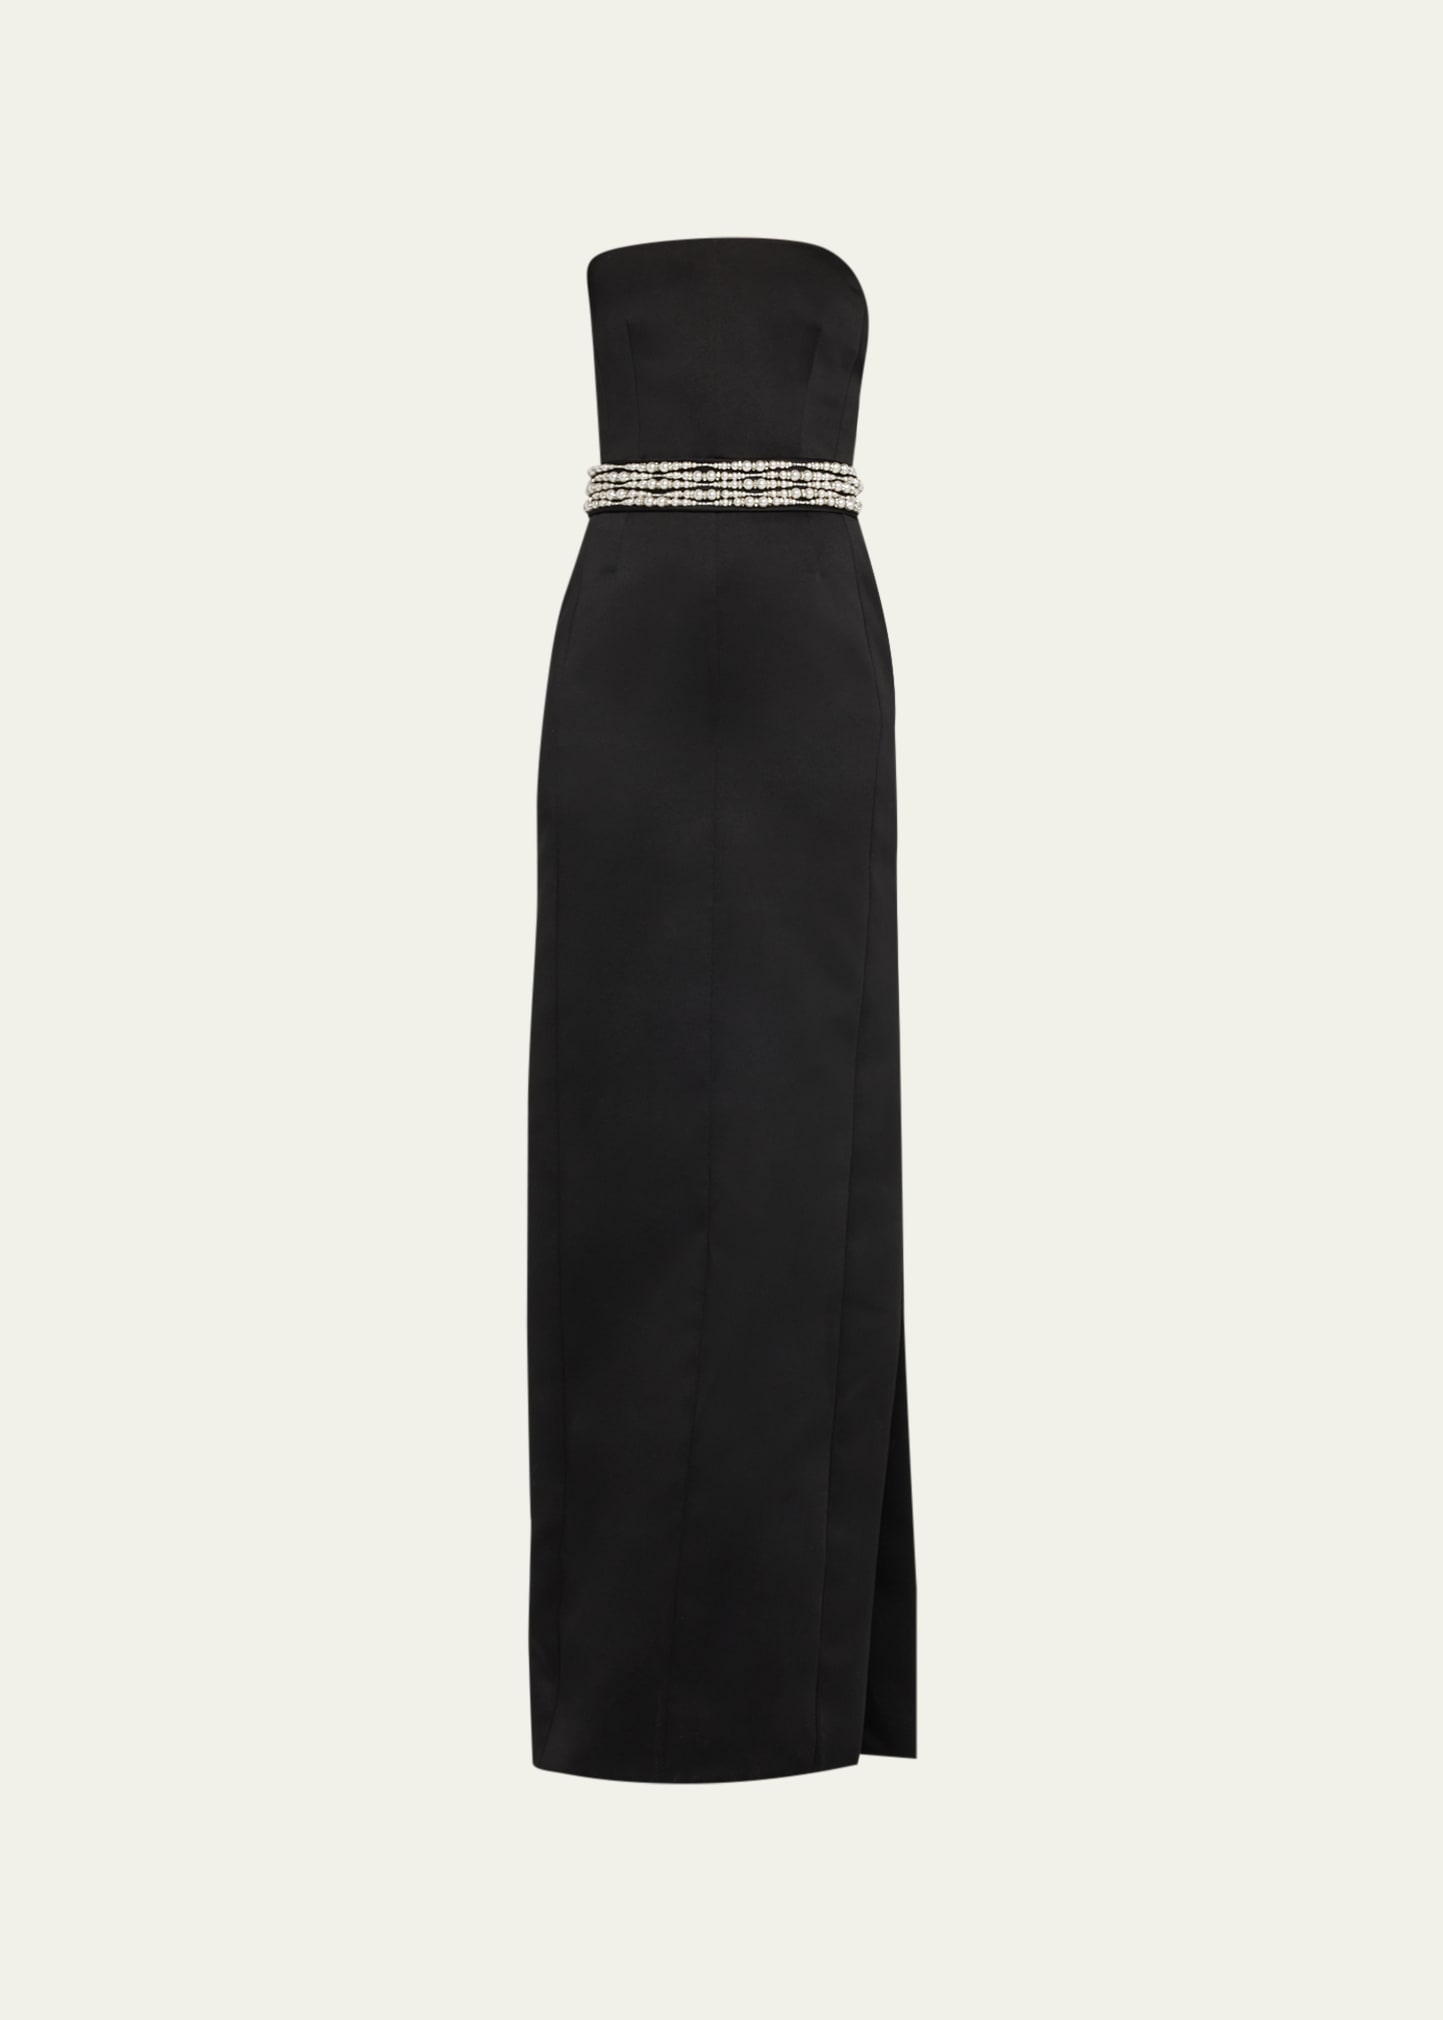 GIVENCHY STRAPLESS BUSTIER COLUMN GOWN WITH PEARL BELT